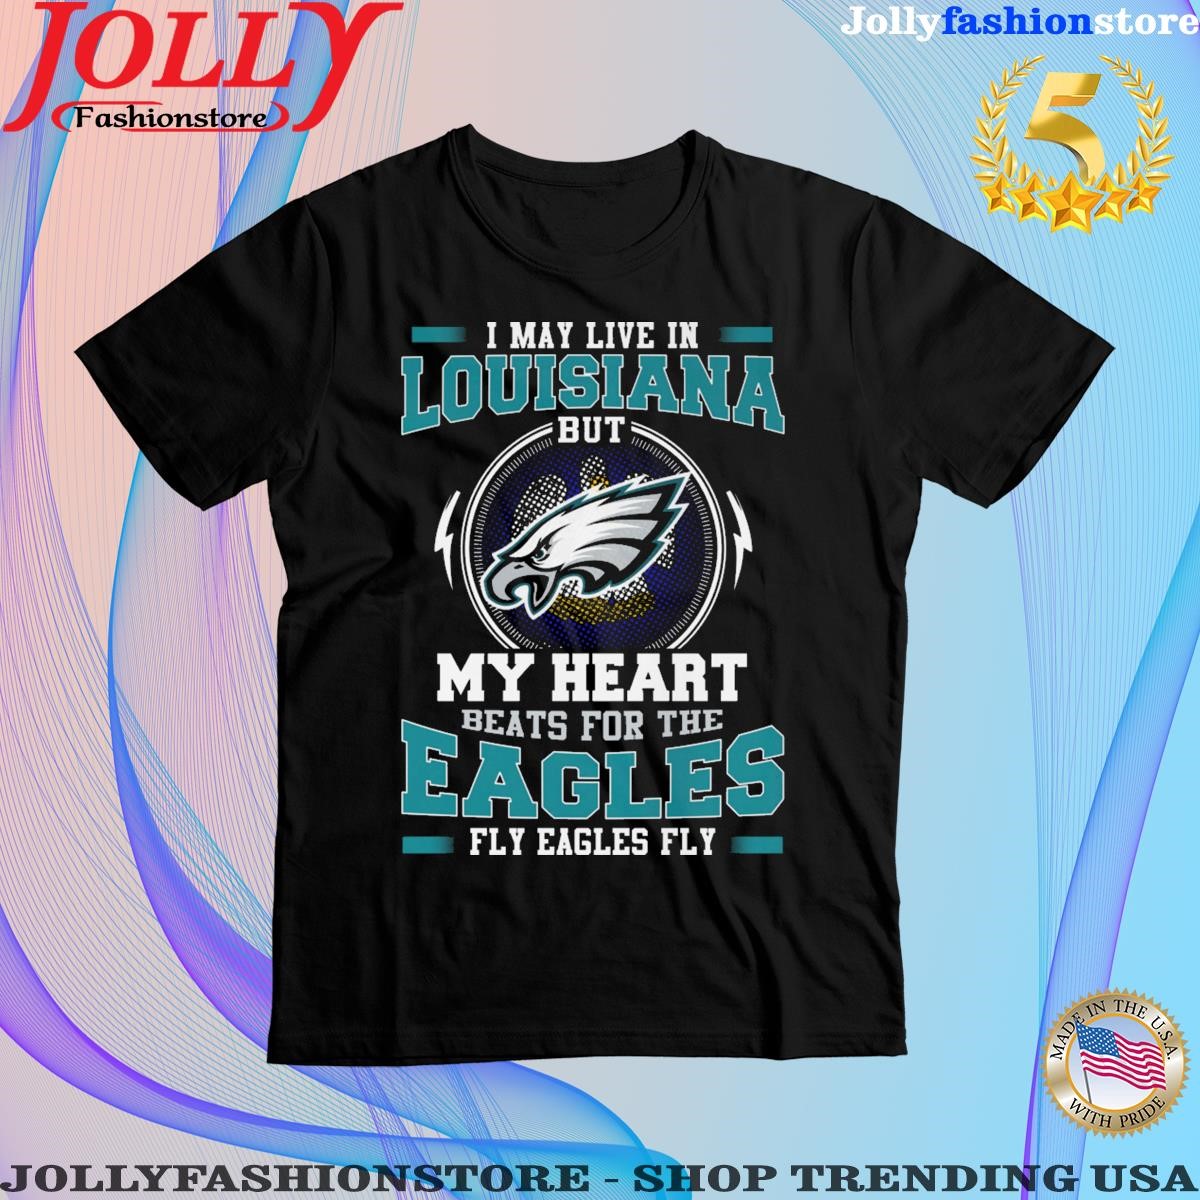 I may live in Louisiana but my heart beats for the eagles fly eagles fly shirt